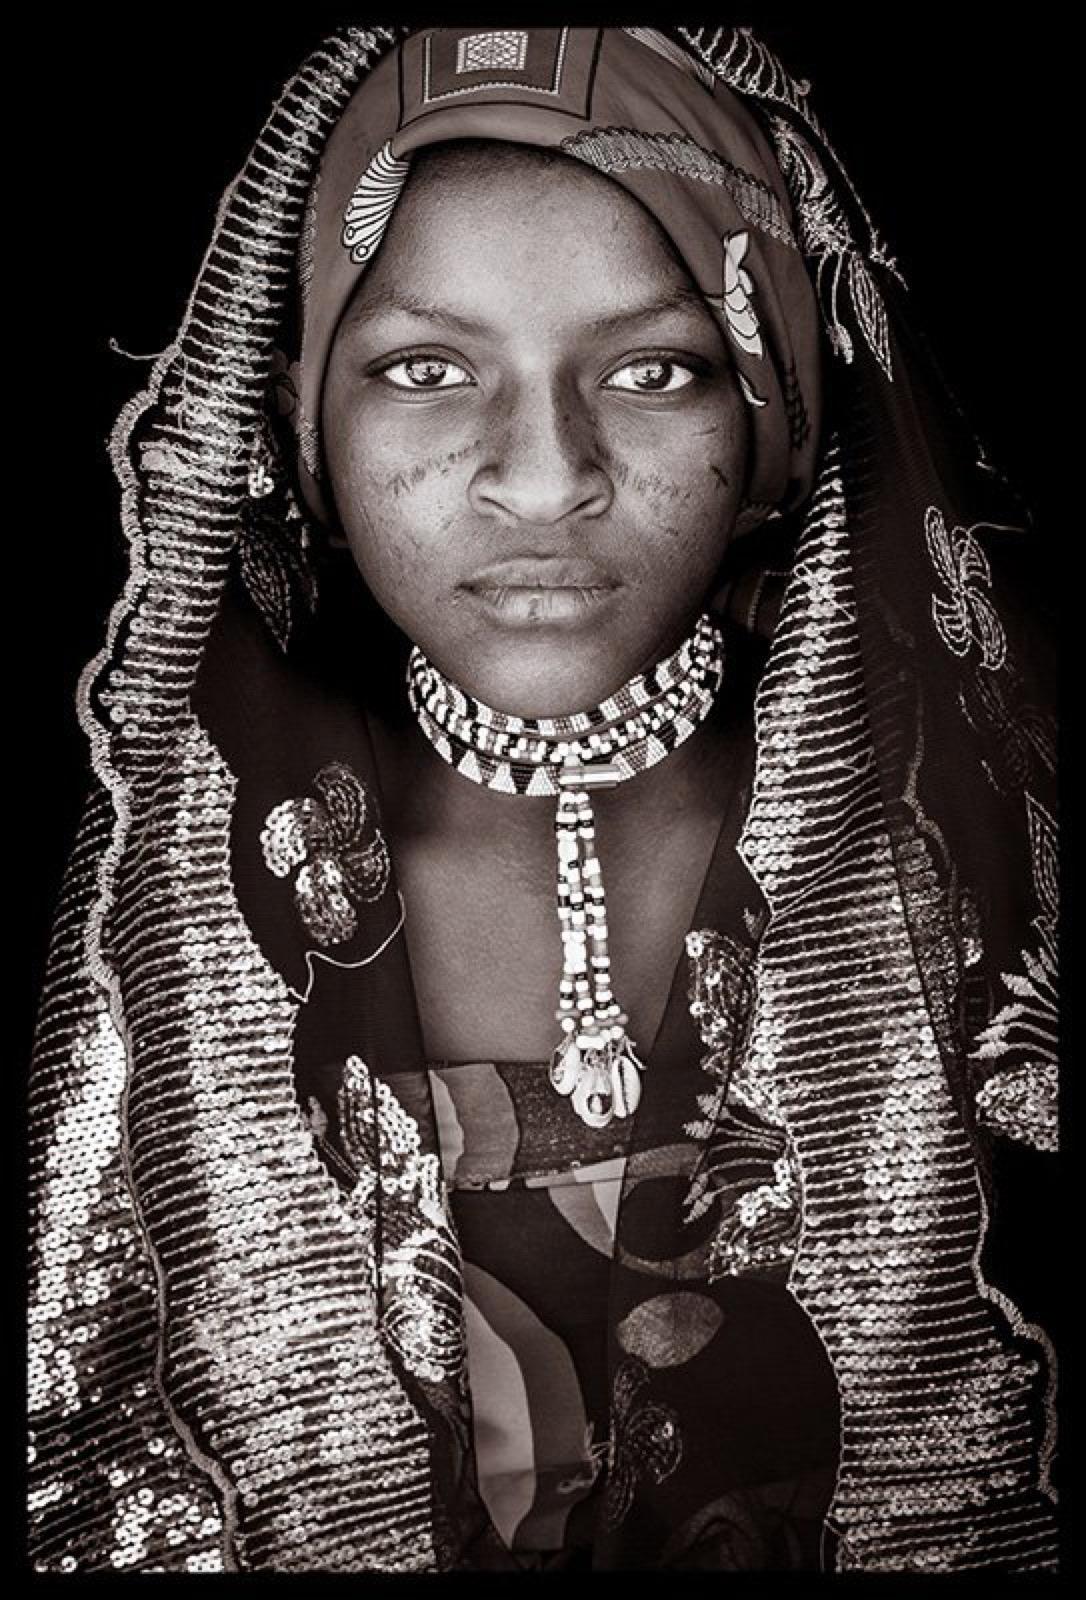 A young Fulani girl in Ethiopia.  The  Fulani have a nomadic lifestyle that sees them moving across the Sahel from Mali in the West to  Ethiopia in the East.
John Kenny’s work is all shot on location in some of the remotest corners of Africa. His